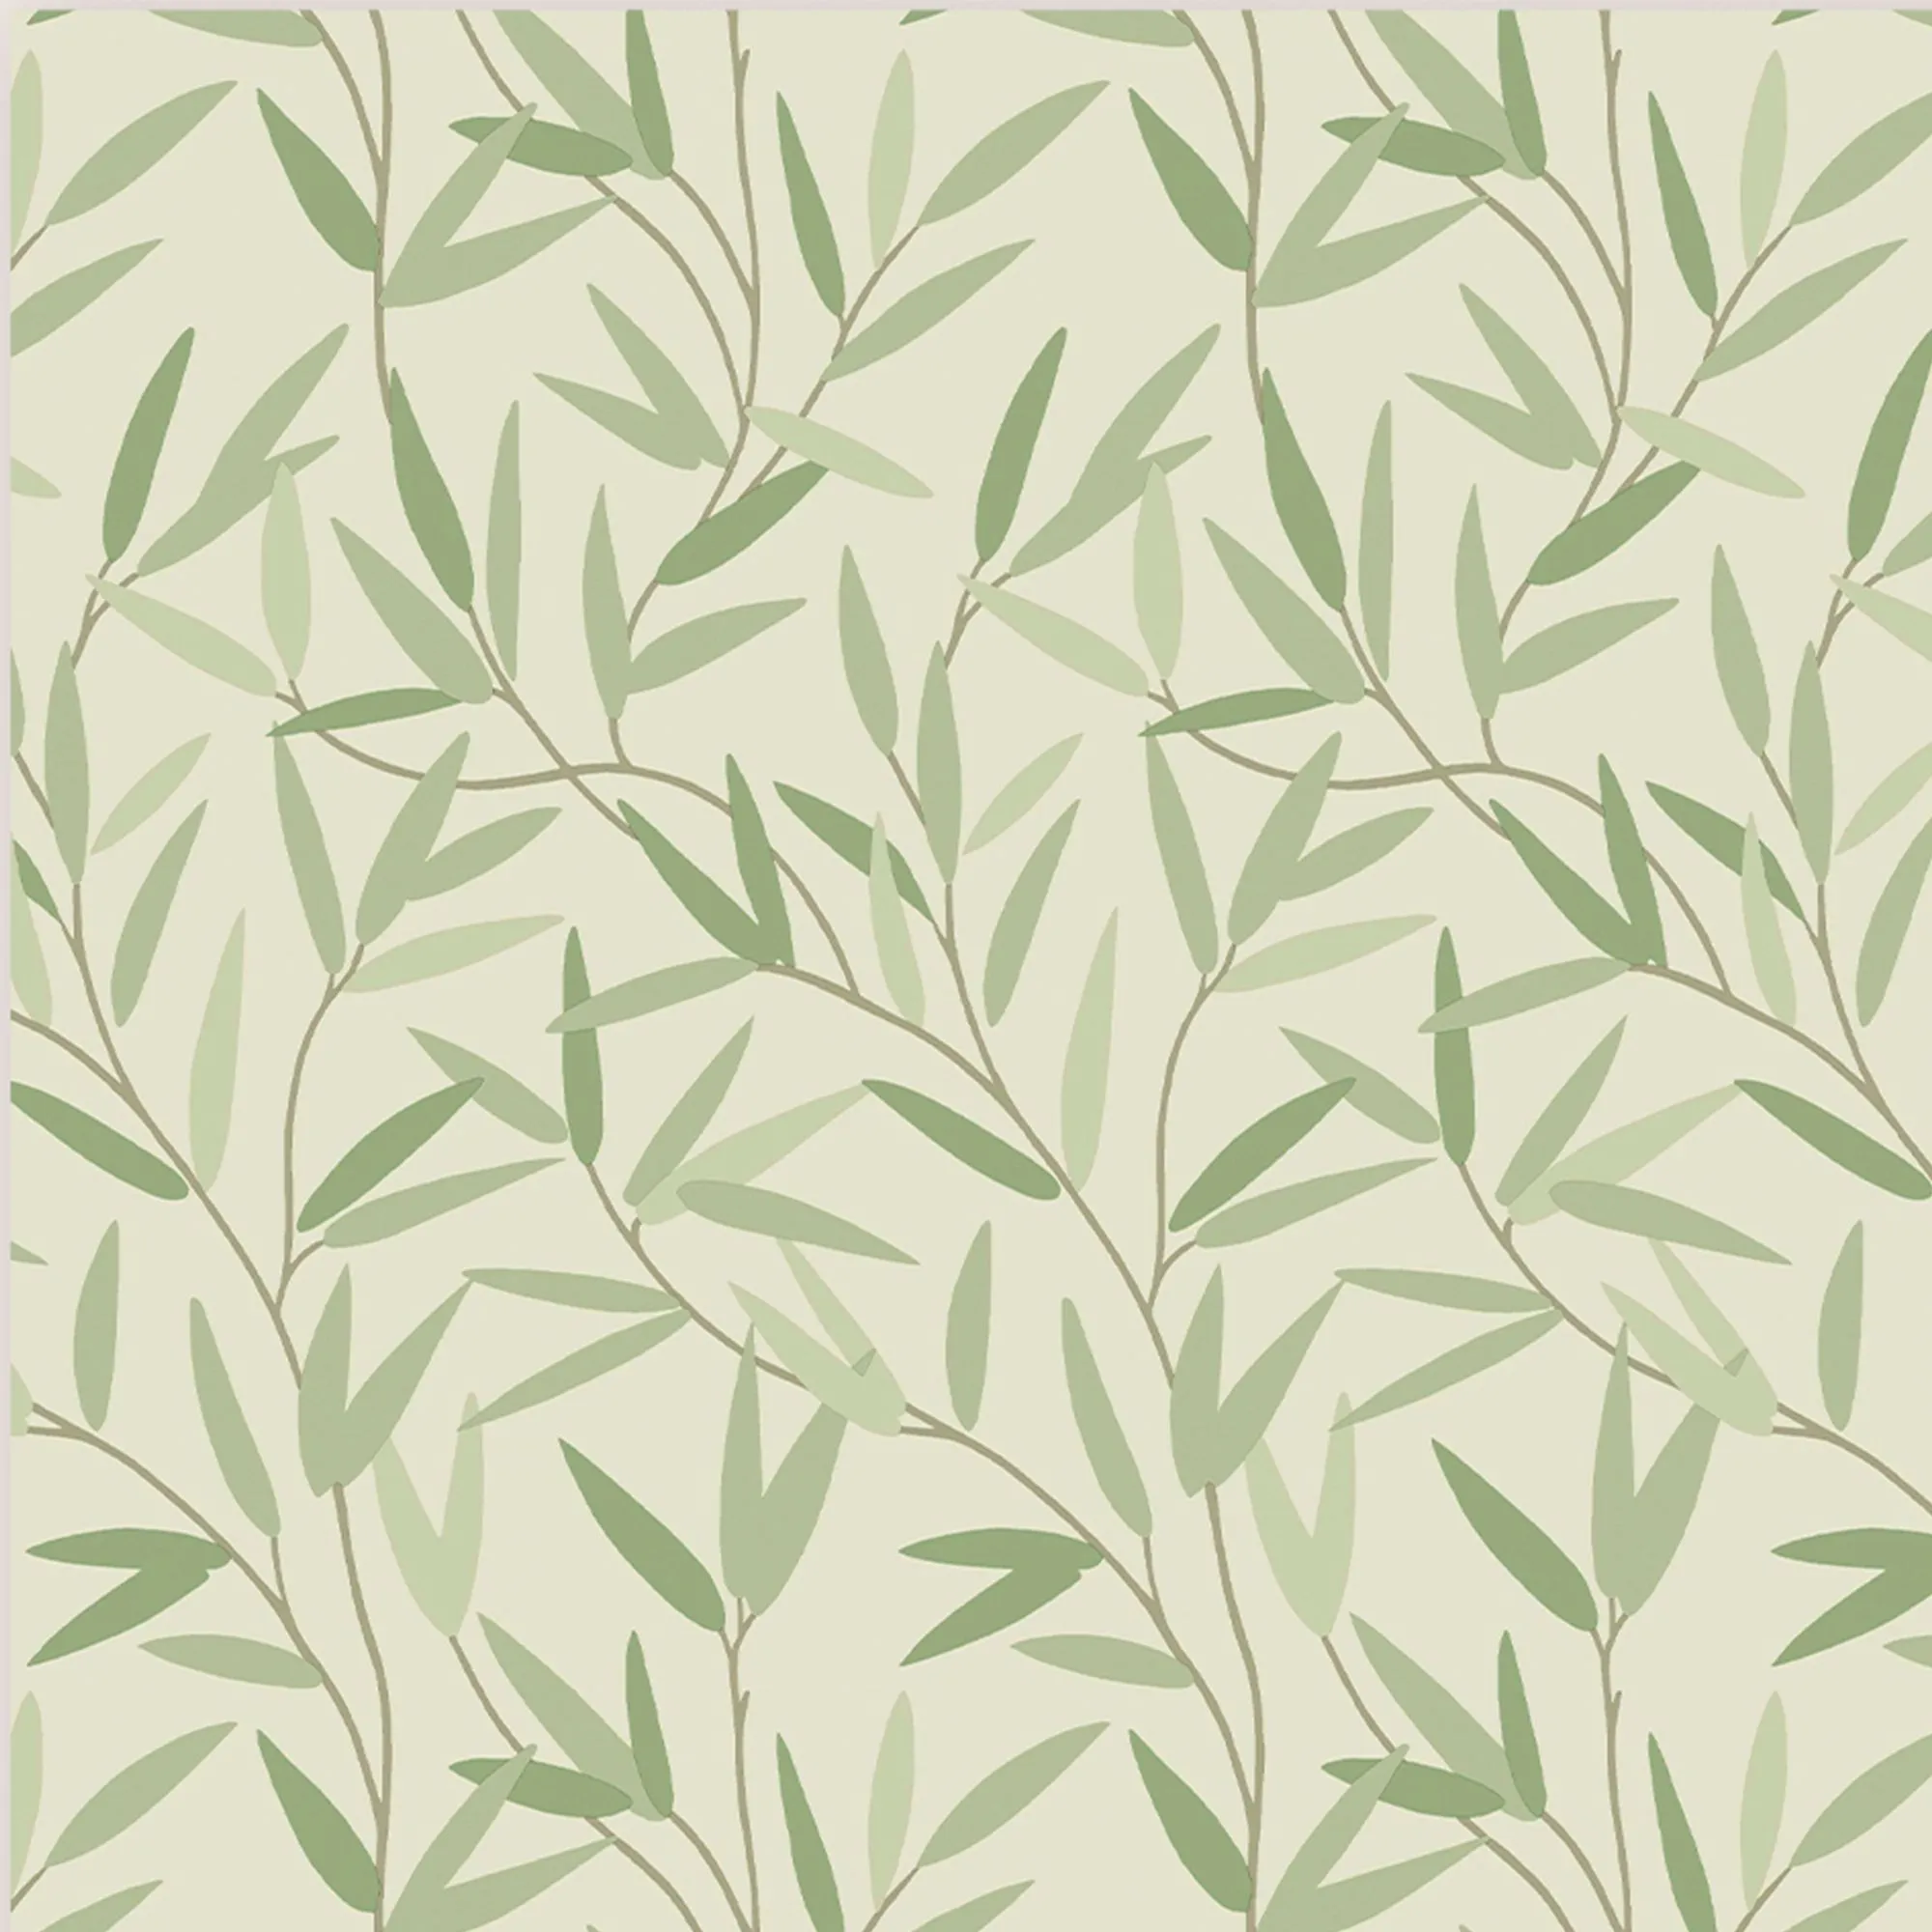 Laura Ashley Willow Hedgerow Leaf Smooth Wallpaper